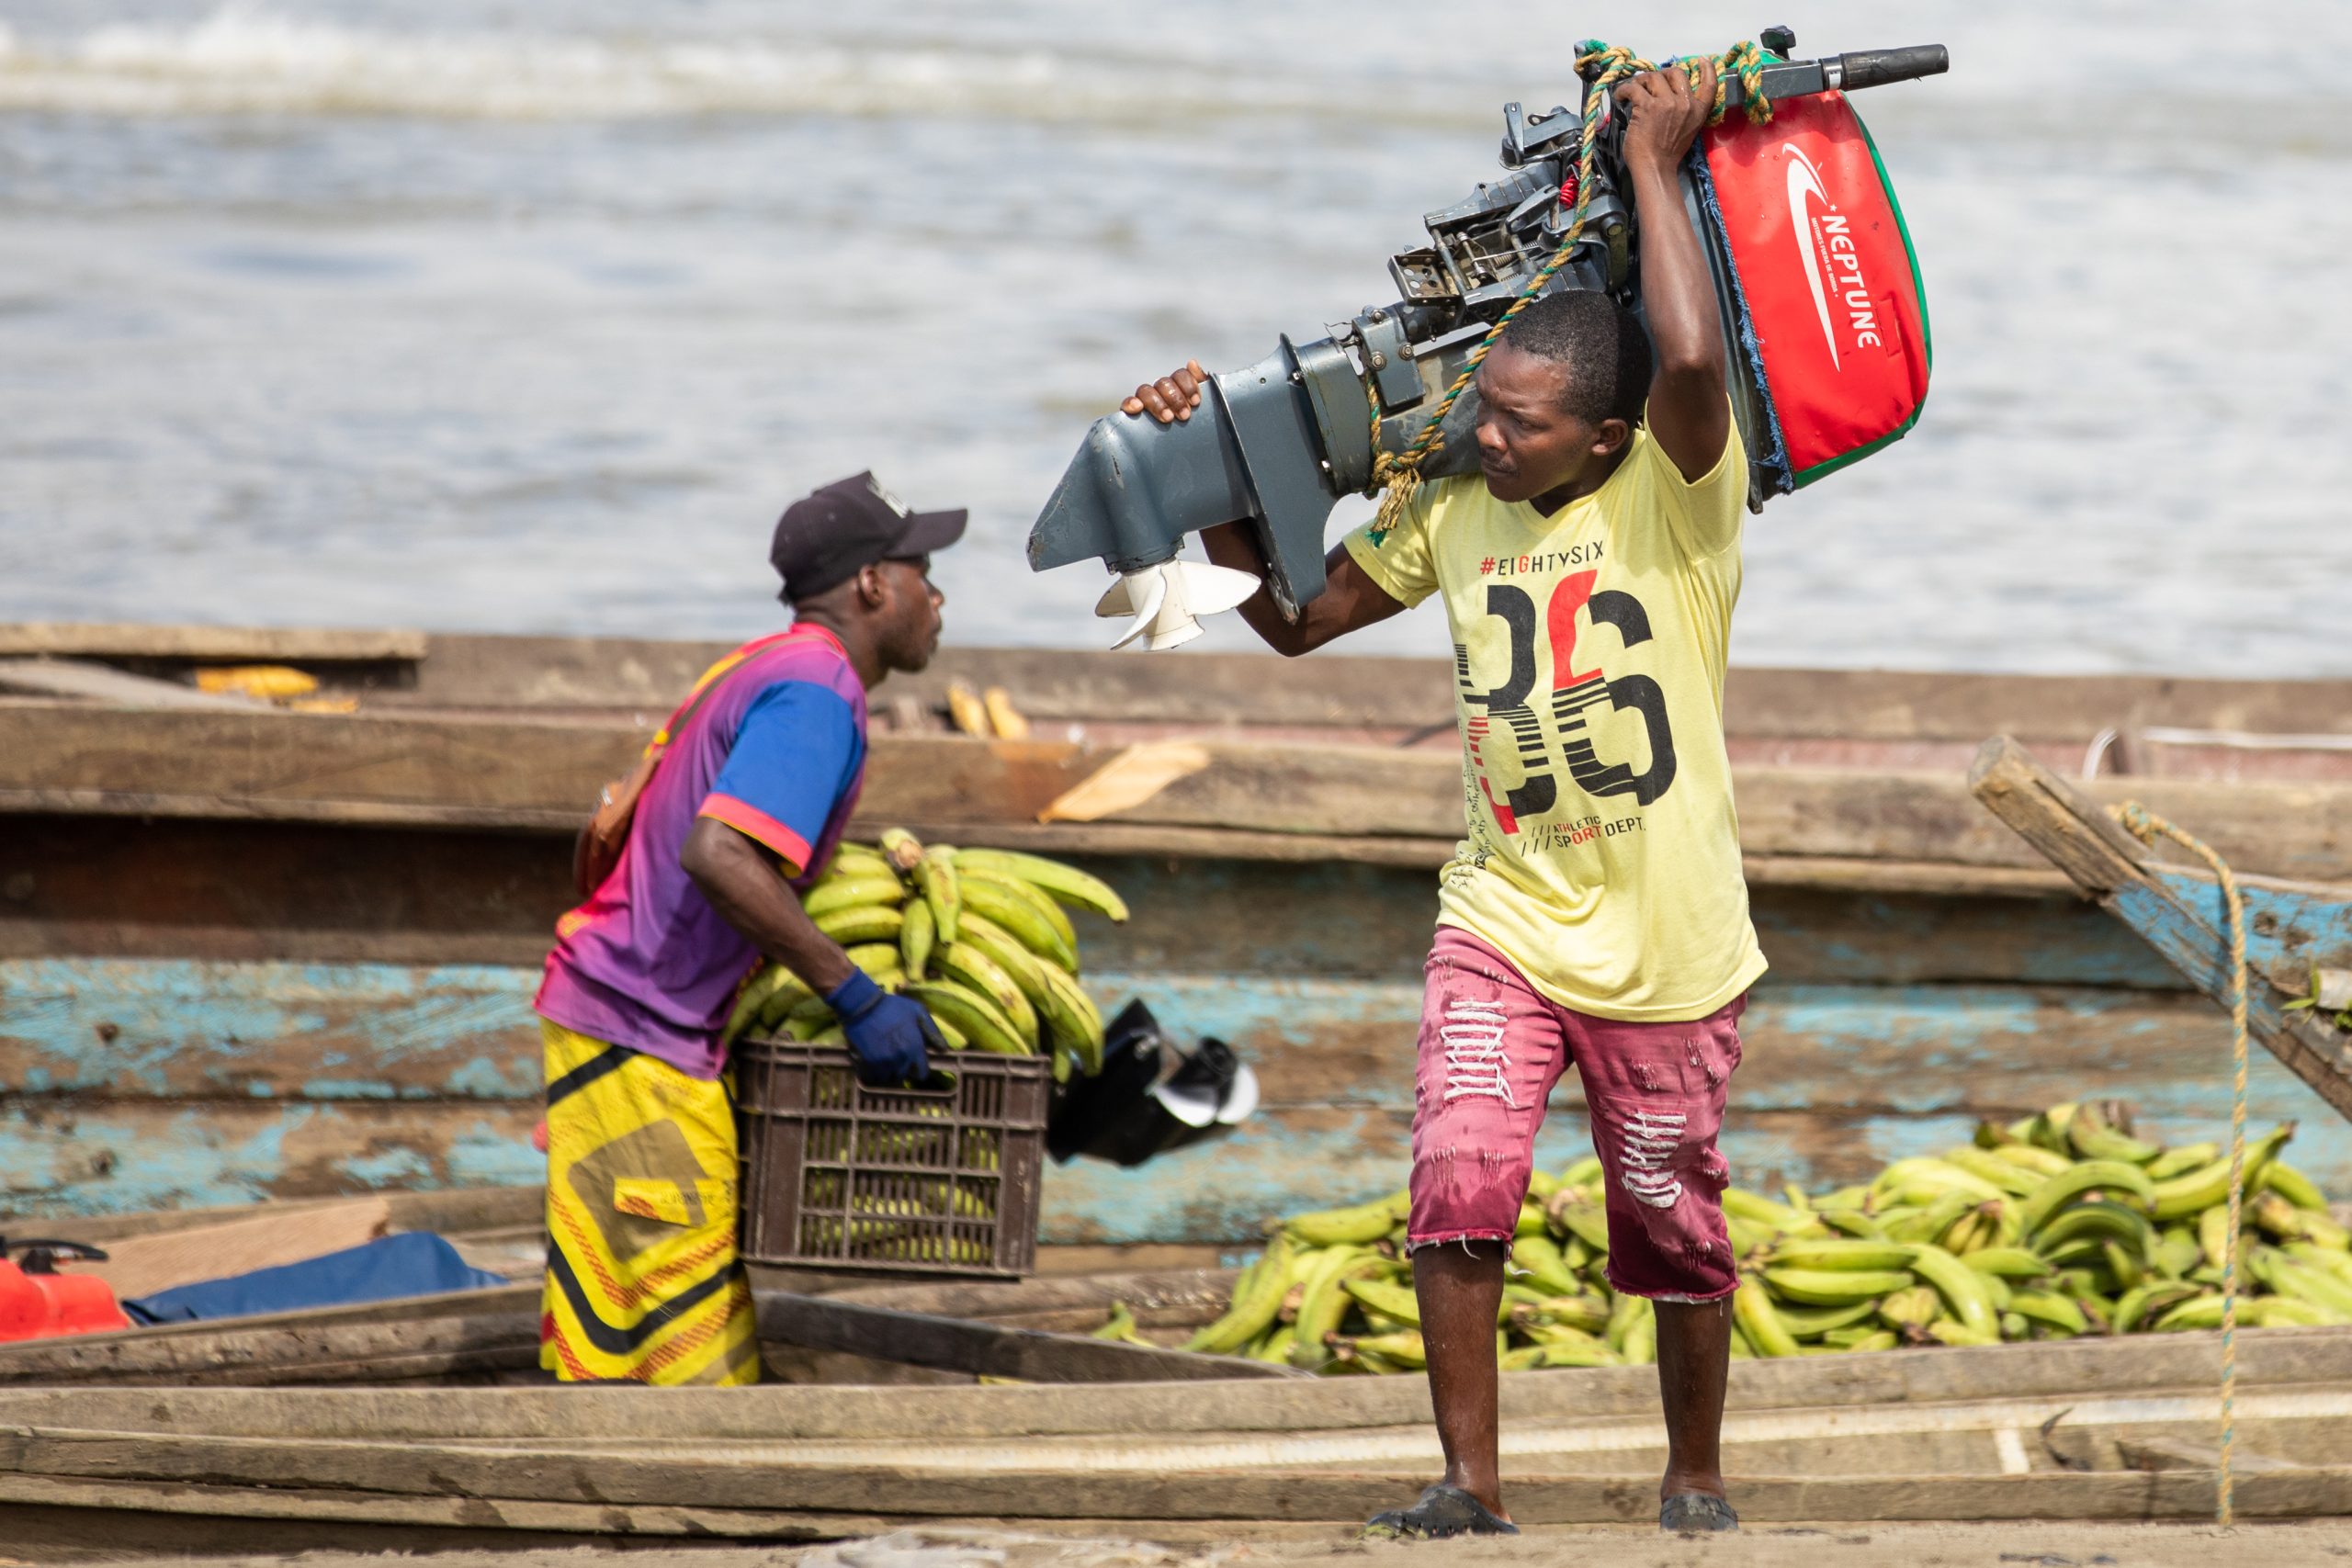 one man offloading crate of plantains while second carries motor on small boat